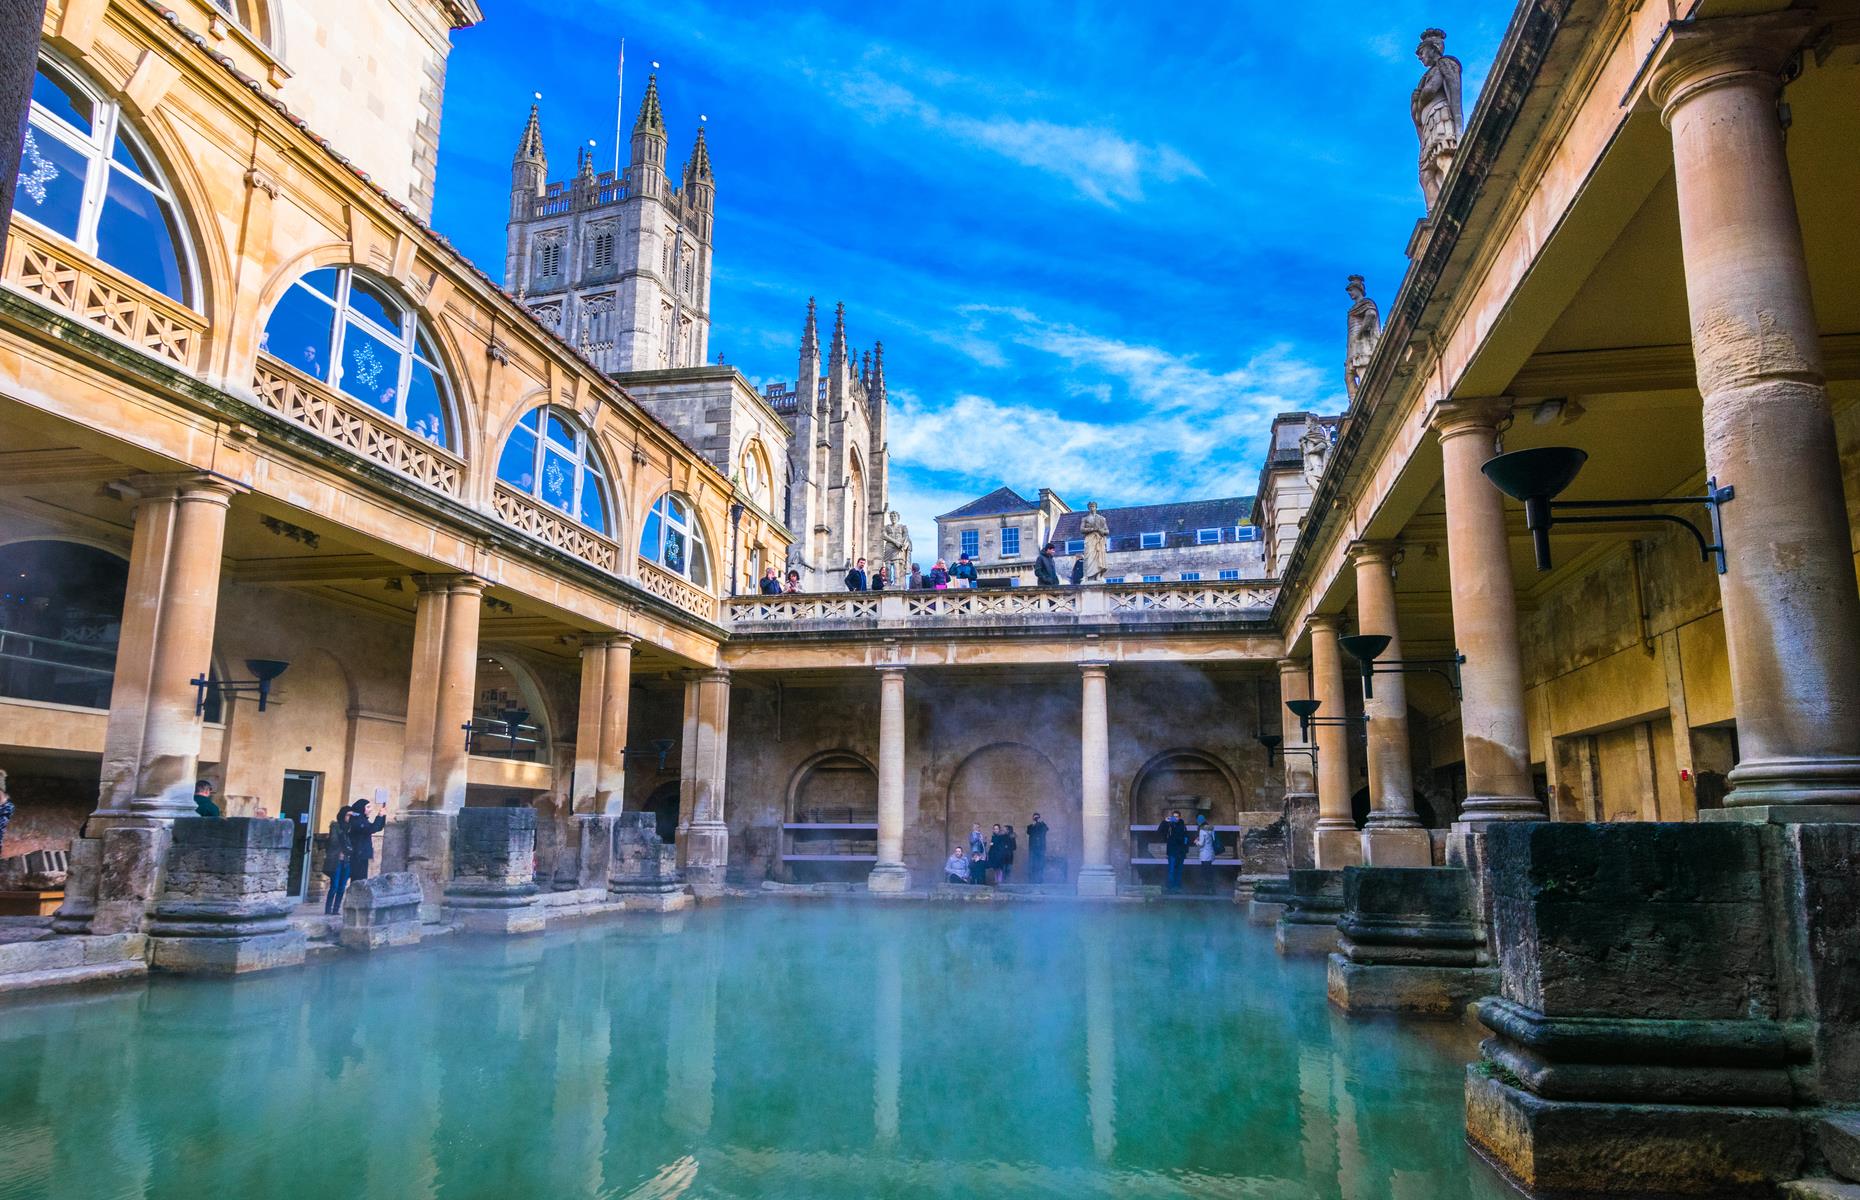 <p>The elegant Georgian city of Bath attracts millions of tourists, not least for its magnificent modern spa complex and Roman Baths. Start by exploring the thermal waters at the Thermae Bath Spa – the highlight is bubbling away in the steaming rooftop pool, with city skyline views. Next, step back 1,900 years at the Roman Baths complex. The grand pools are remarkably well-preserved and still flow with hot spring water today. </p>